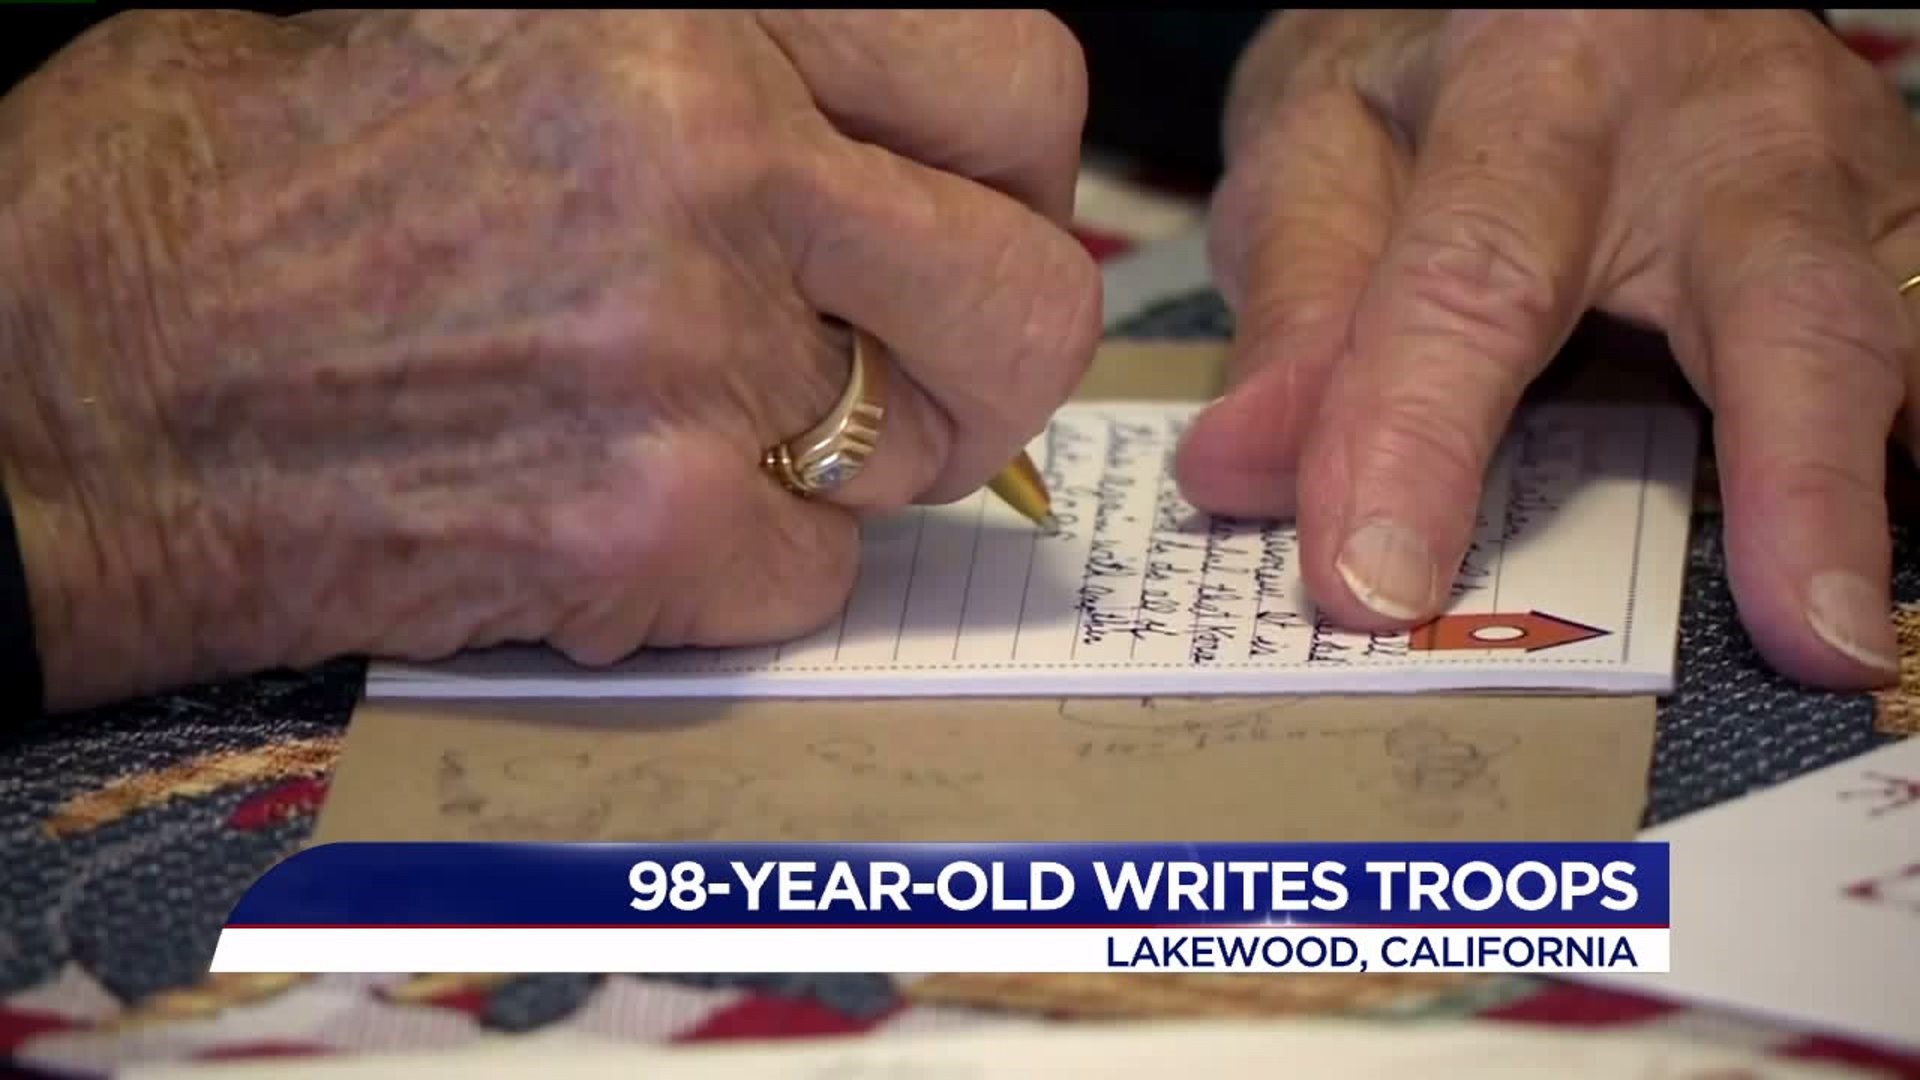 98-year-old writes troops over 8 decades